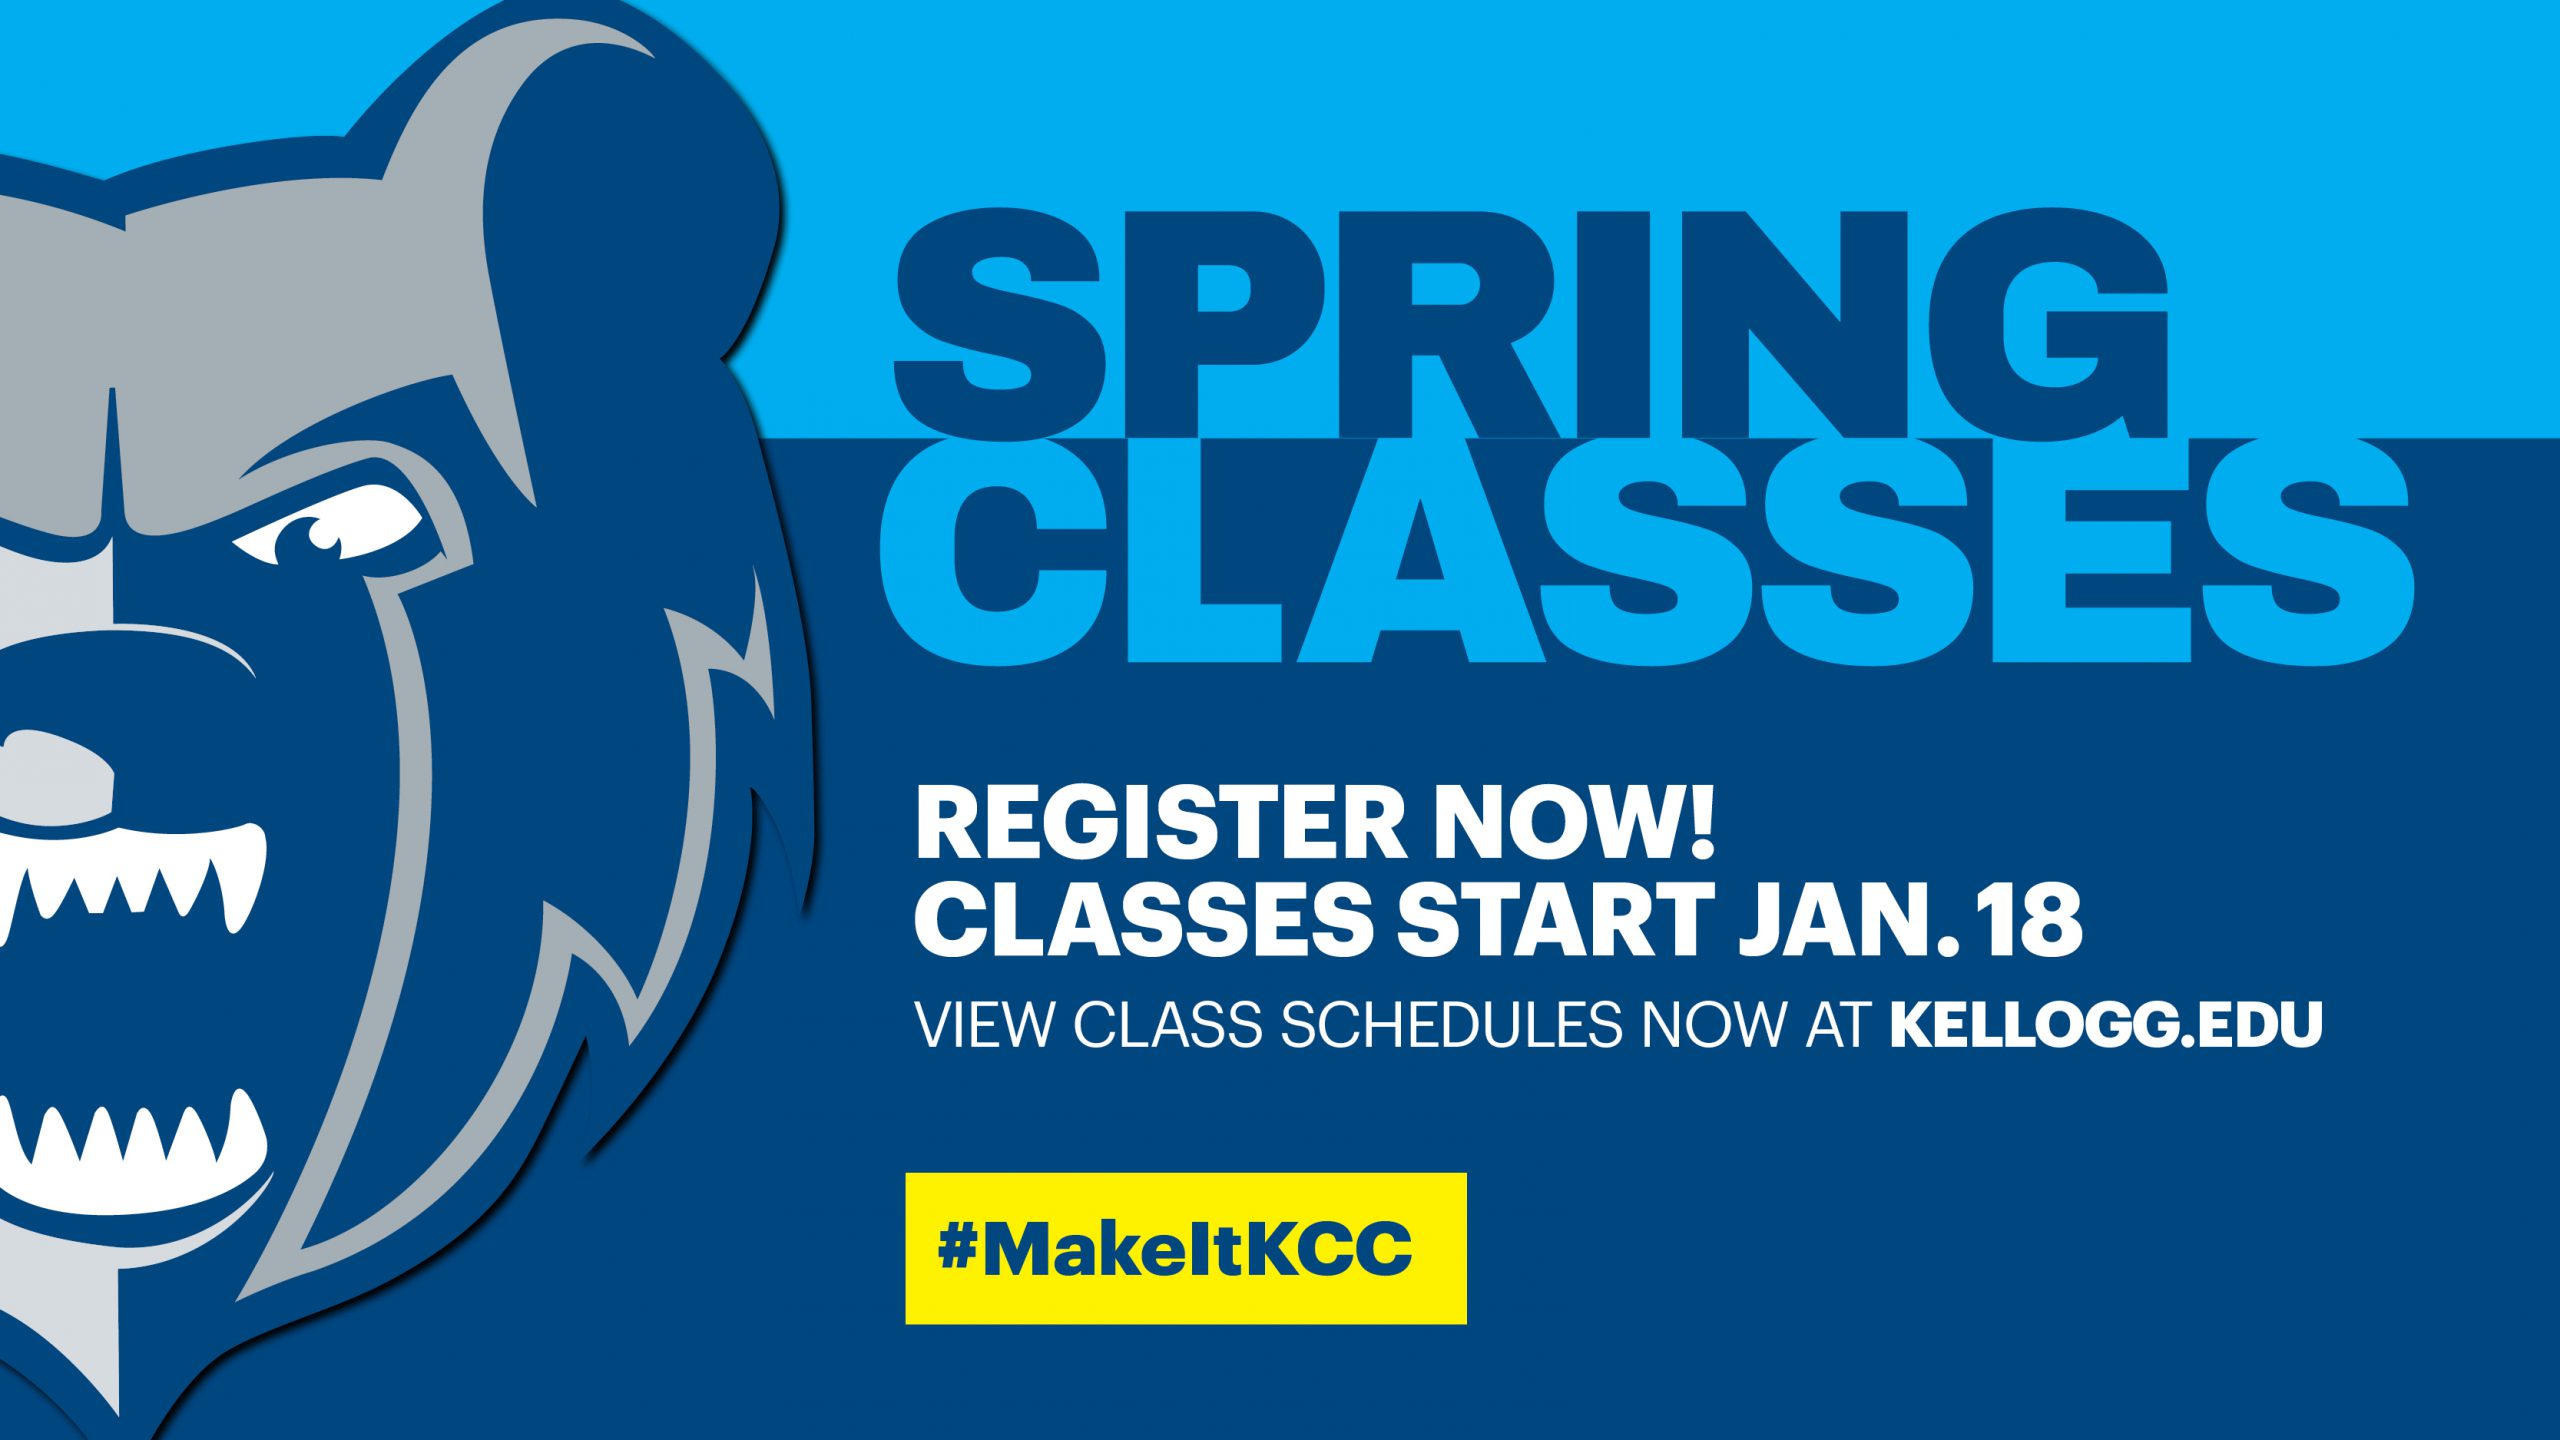 The Bruin head logo on a text slide that reads "Spring classes. Register now. Classes start Jan. 18. View class schedules now at kellogg.edu. #MakeItKCC."